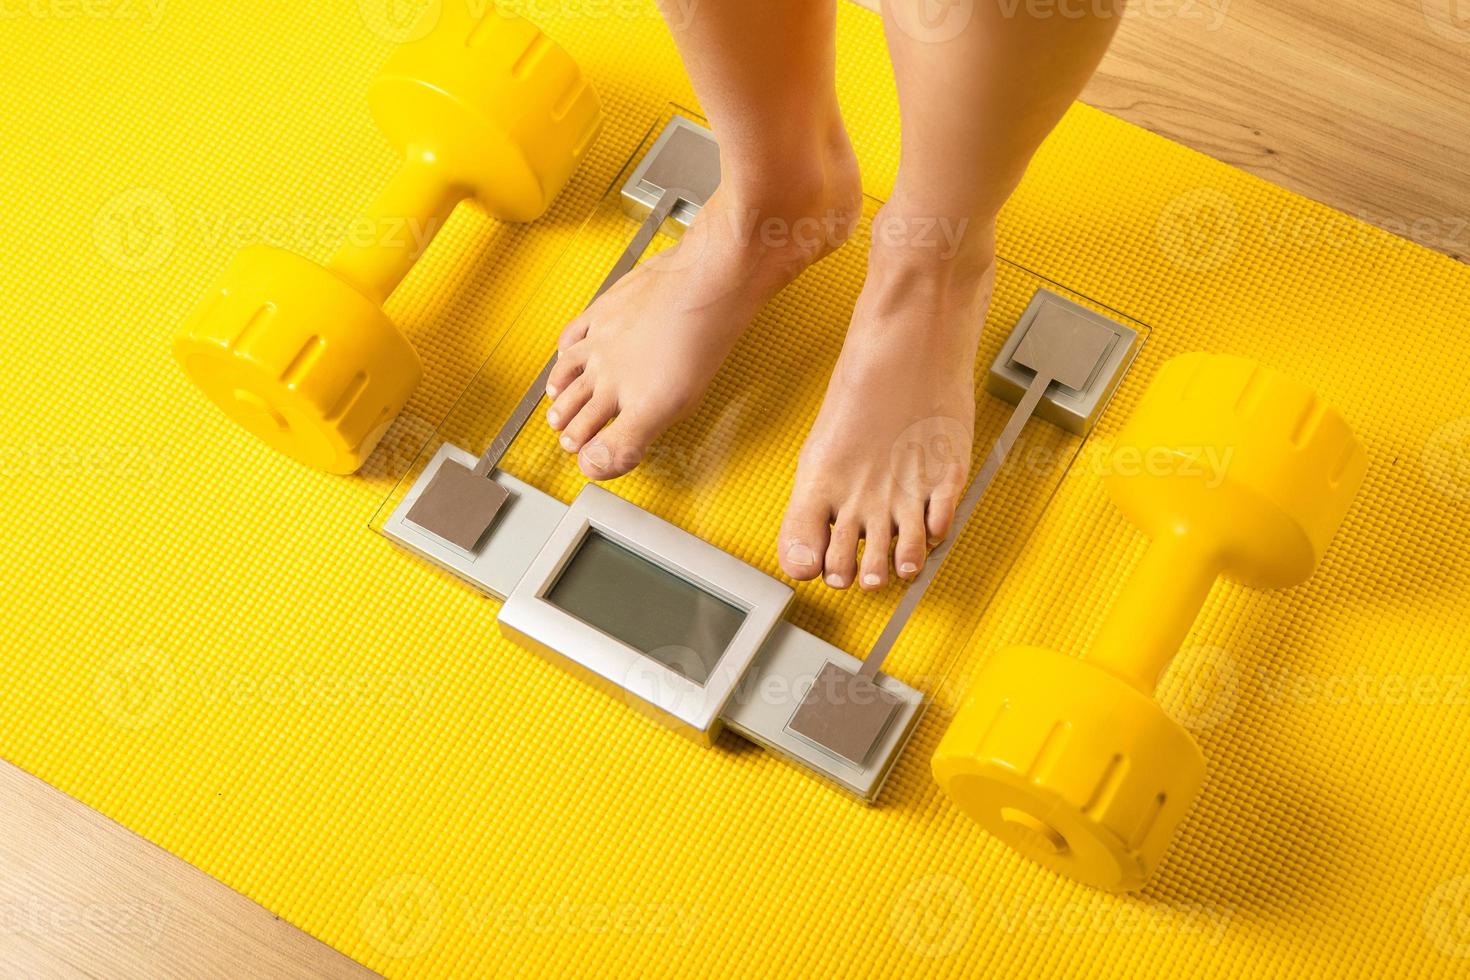 Female feet on the modern weighing scale with a yellow dumbbells and fitness mat photo